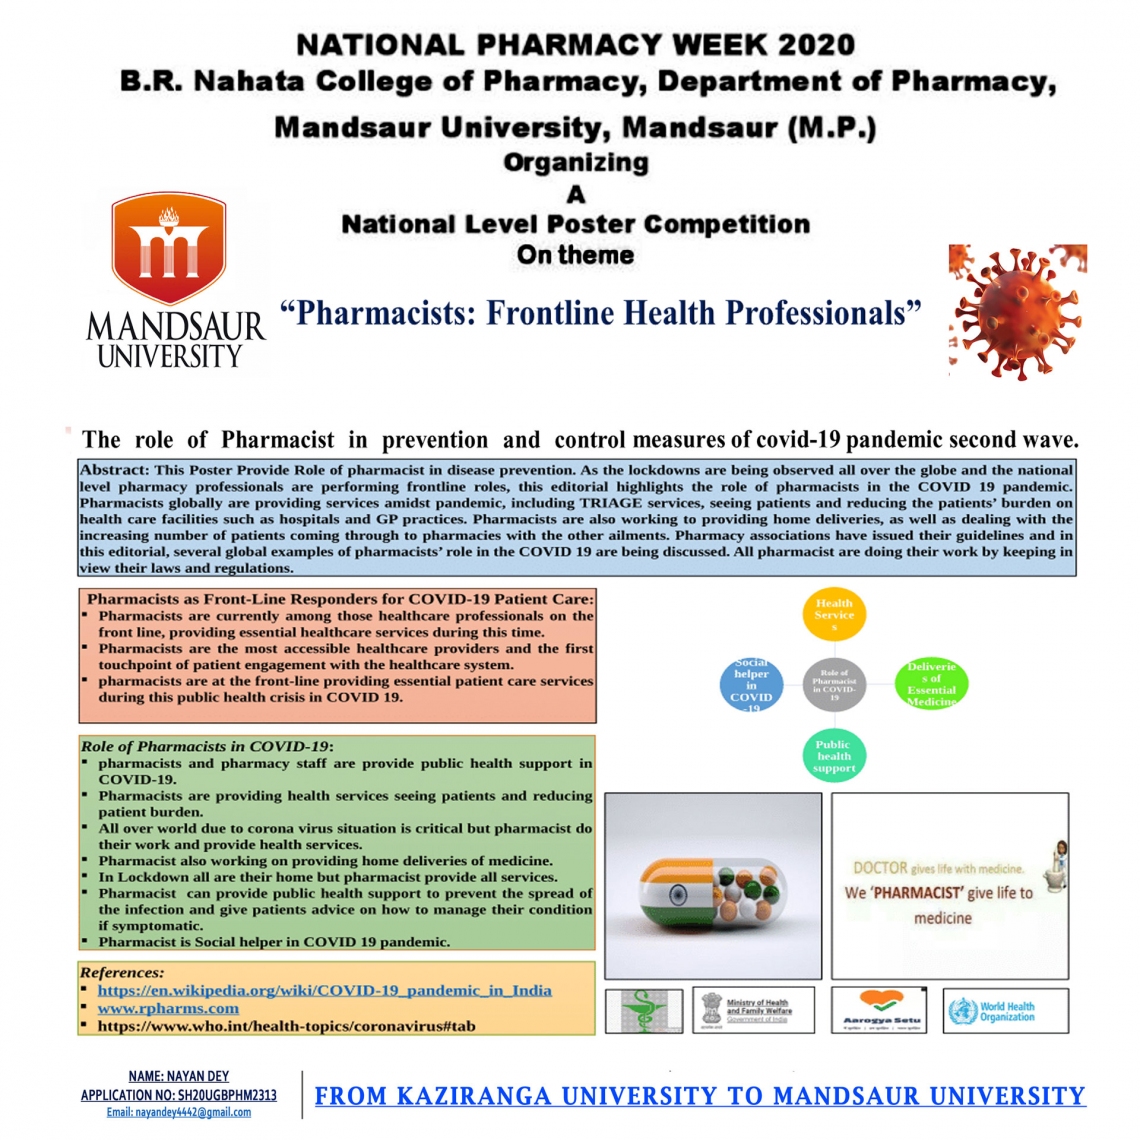 KU Student won third prize at the National level E-poster competition organized by B.R. Nahata College of Pharmacy